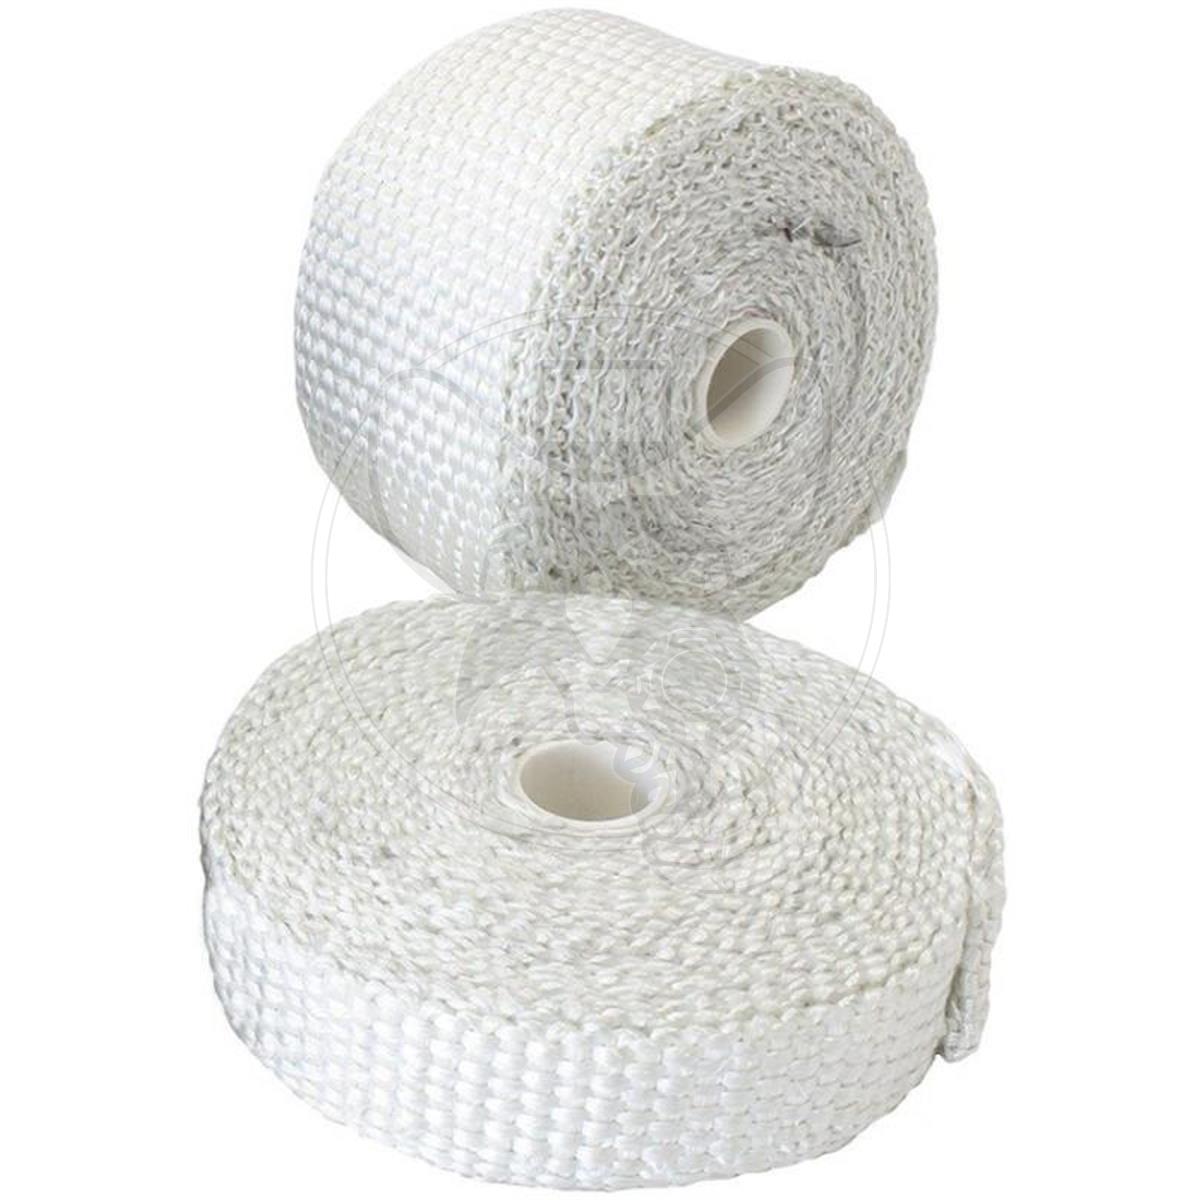 AEROFLOW EXHAUST INSULATION WRAP 2" WIDE X 15FT LONG ROLL - WHITE